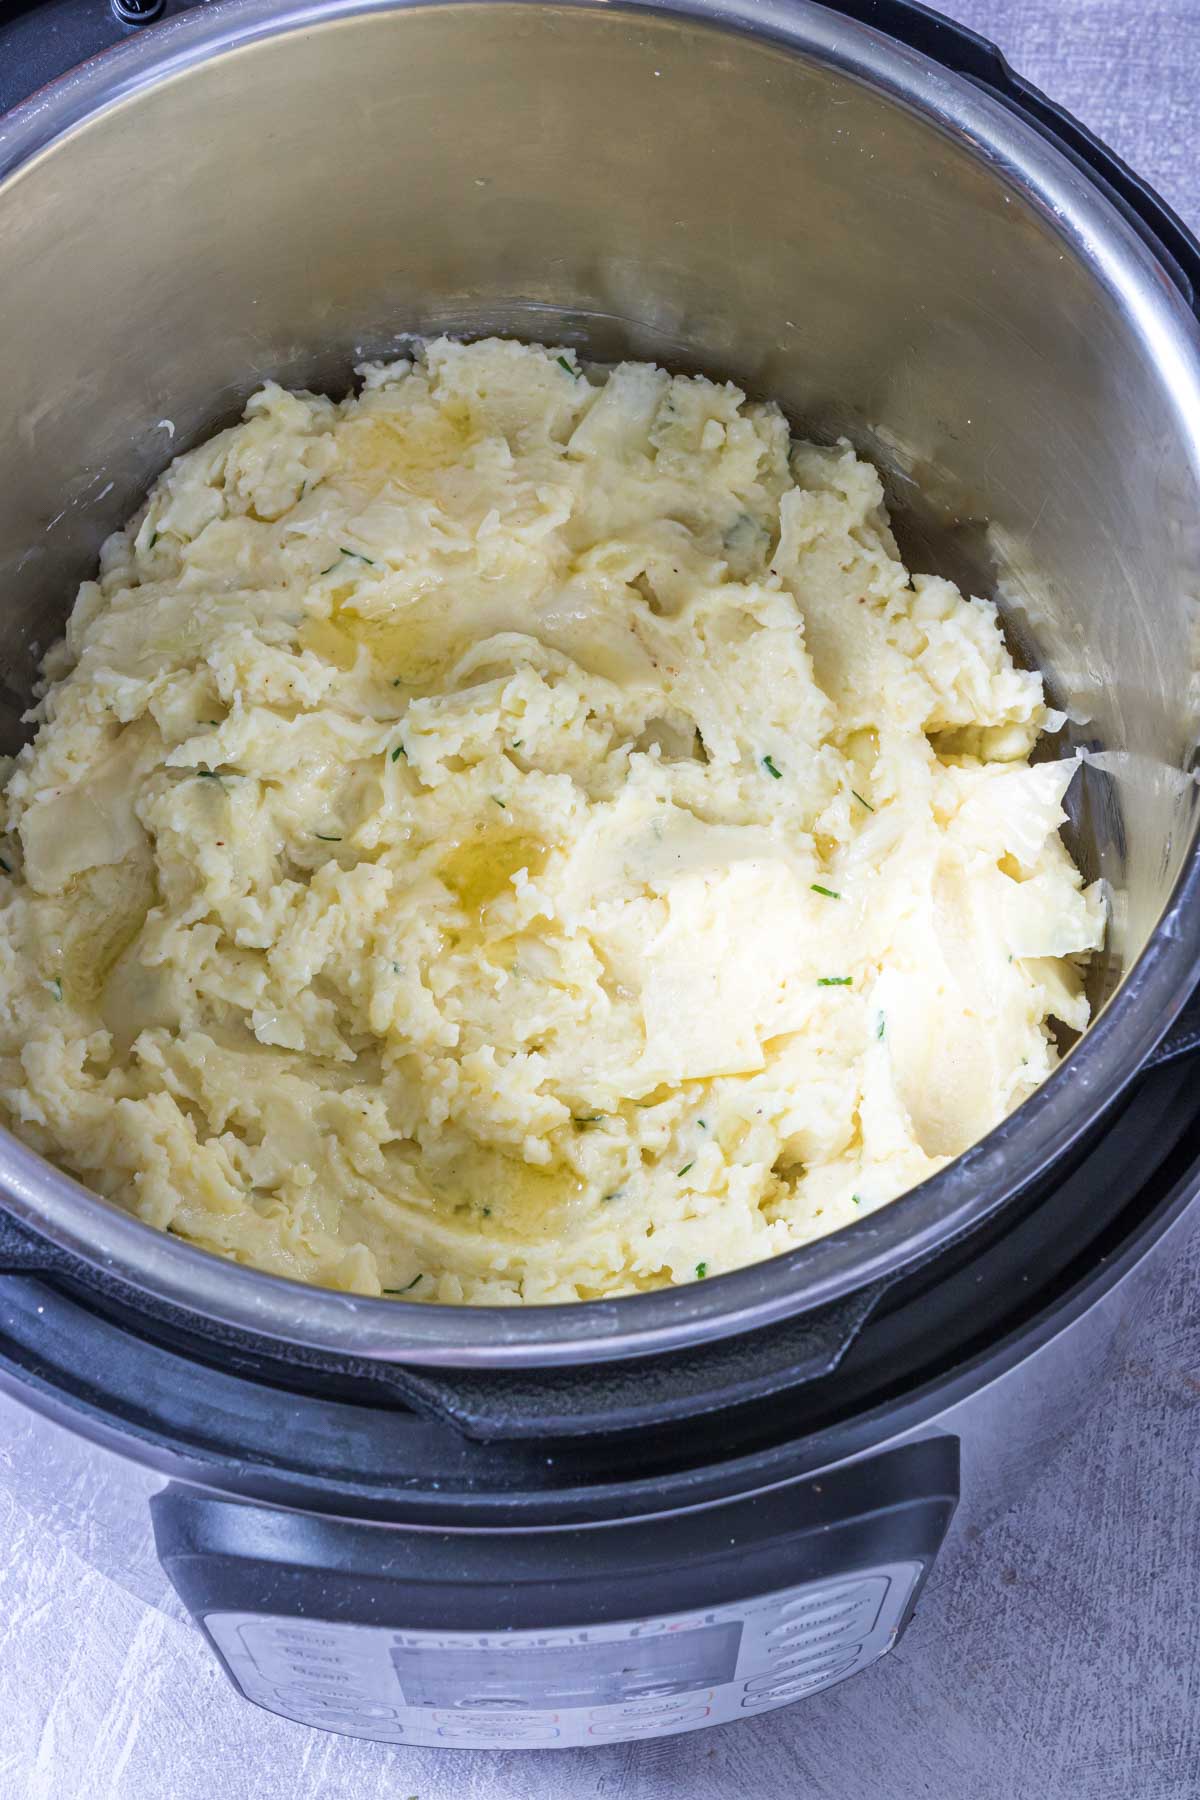 the completed instant pot colcannon inside the instant pot insert and ready to be served.